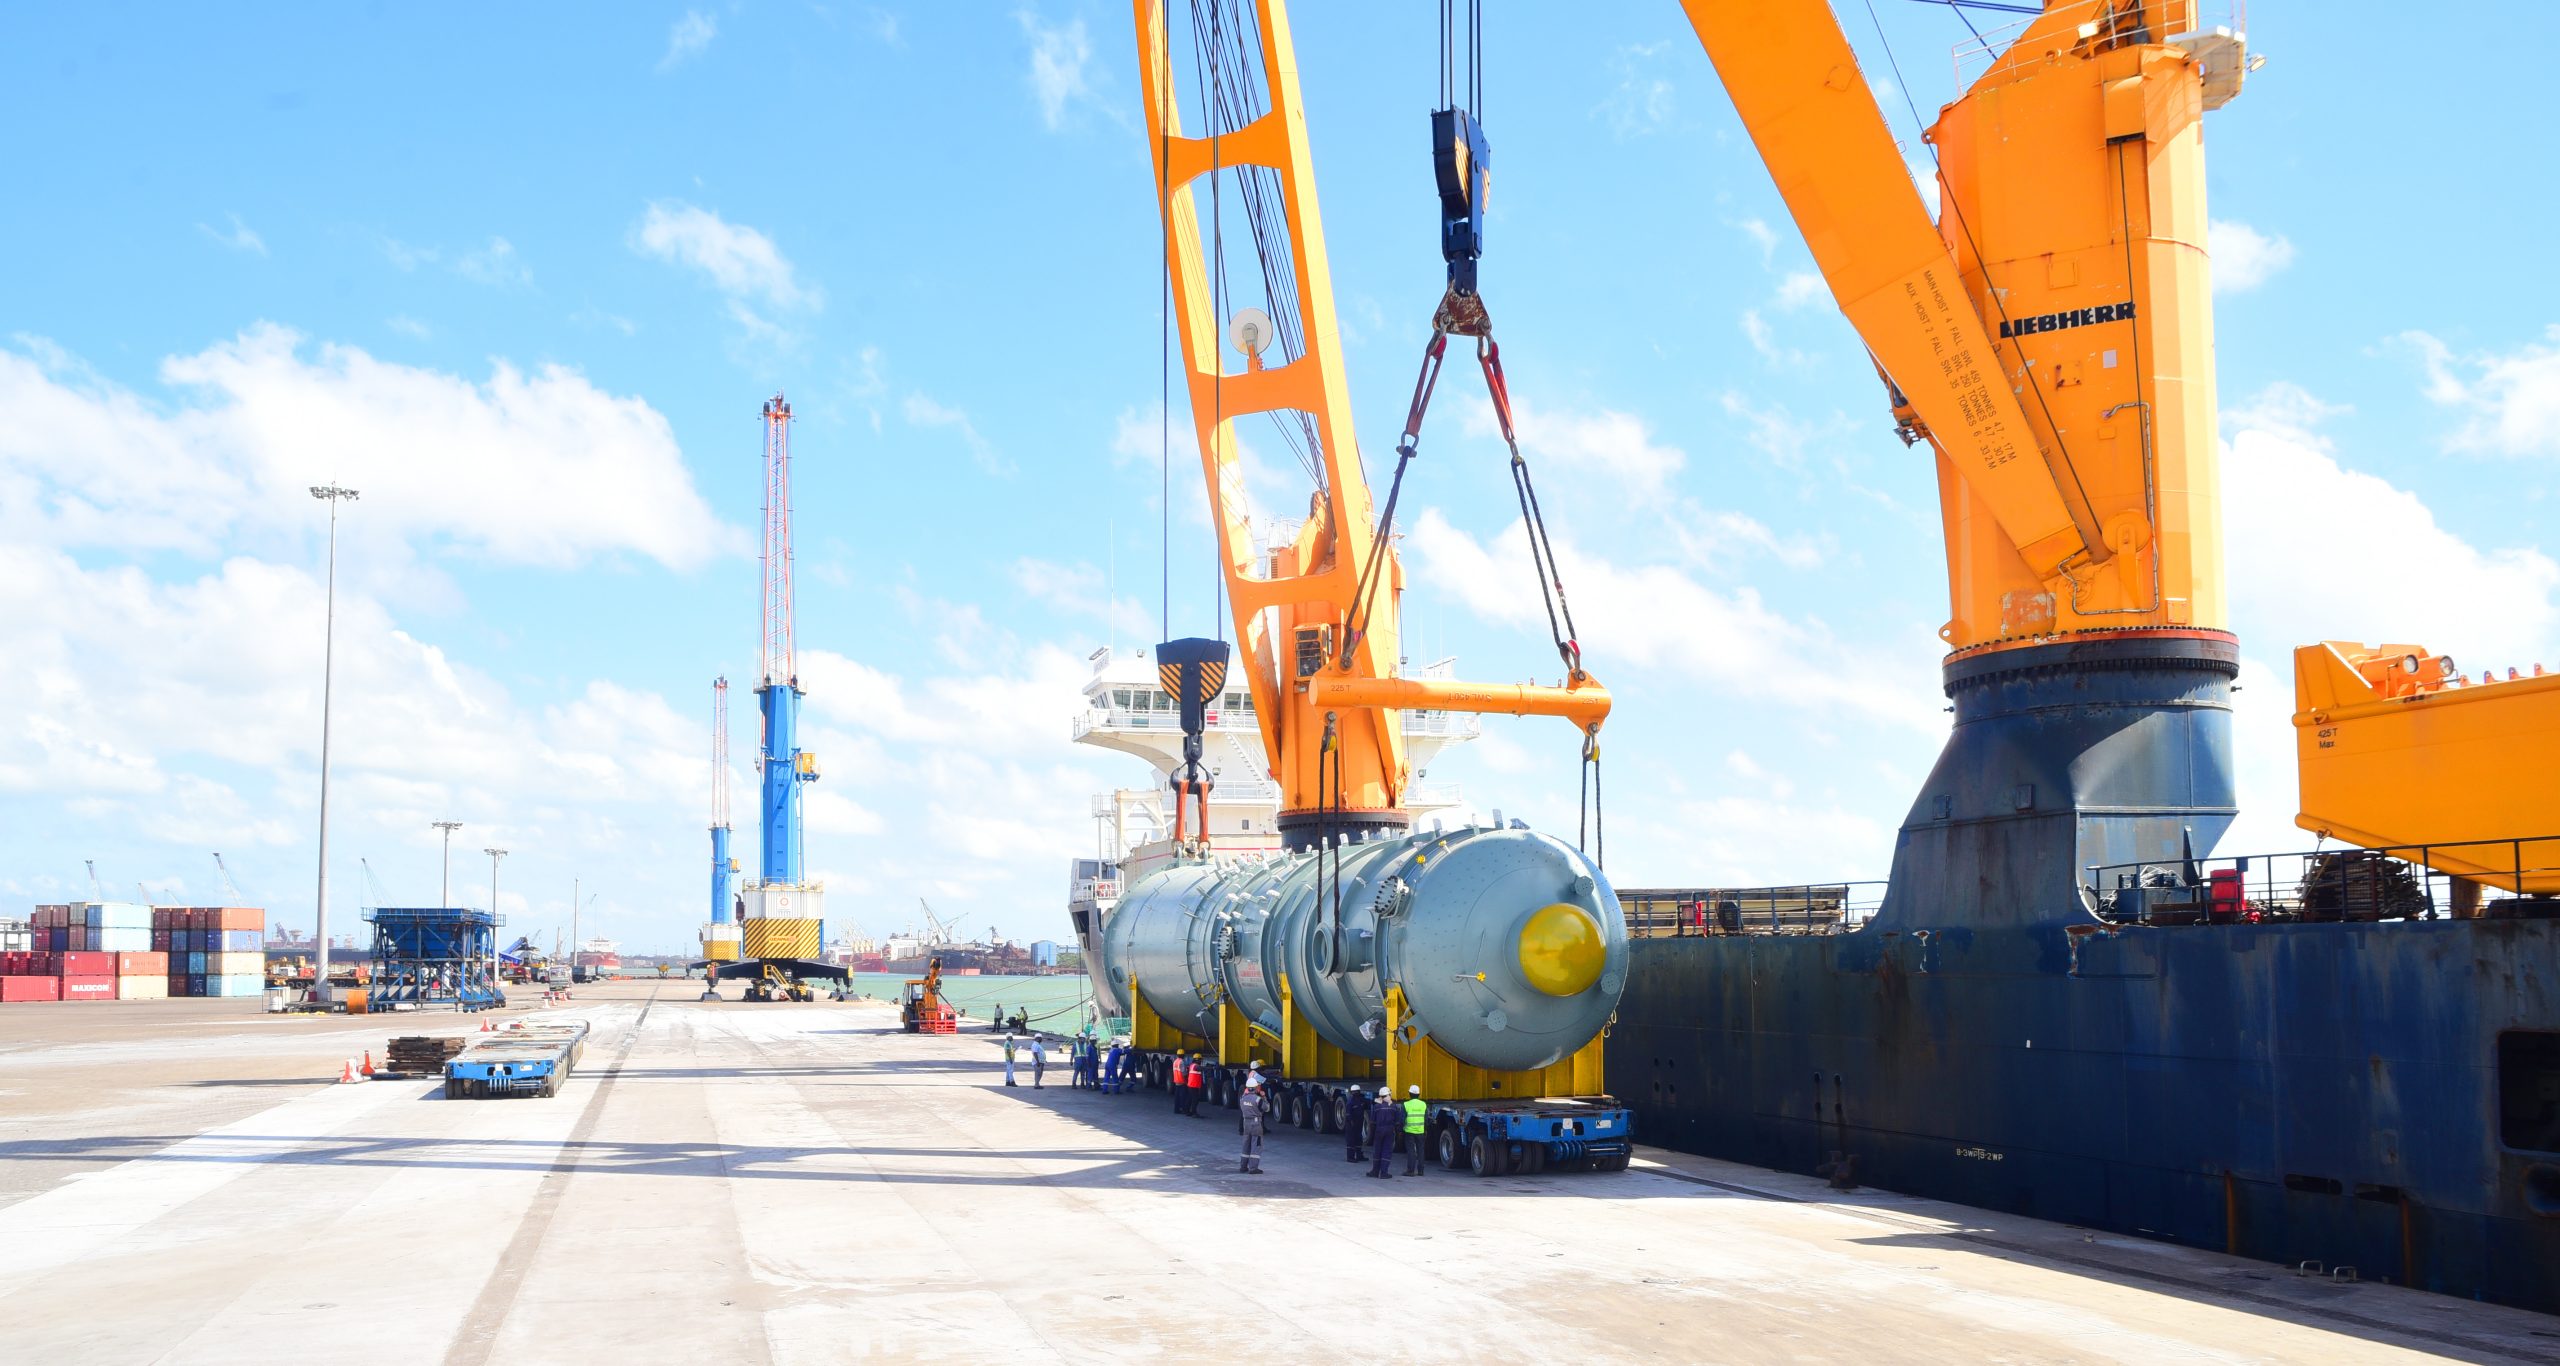 J M Baxi buys Lift & Shift and Allcargo's project forwarding business